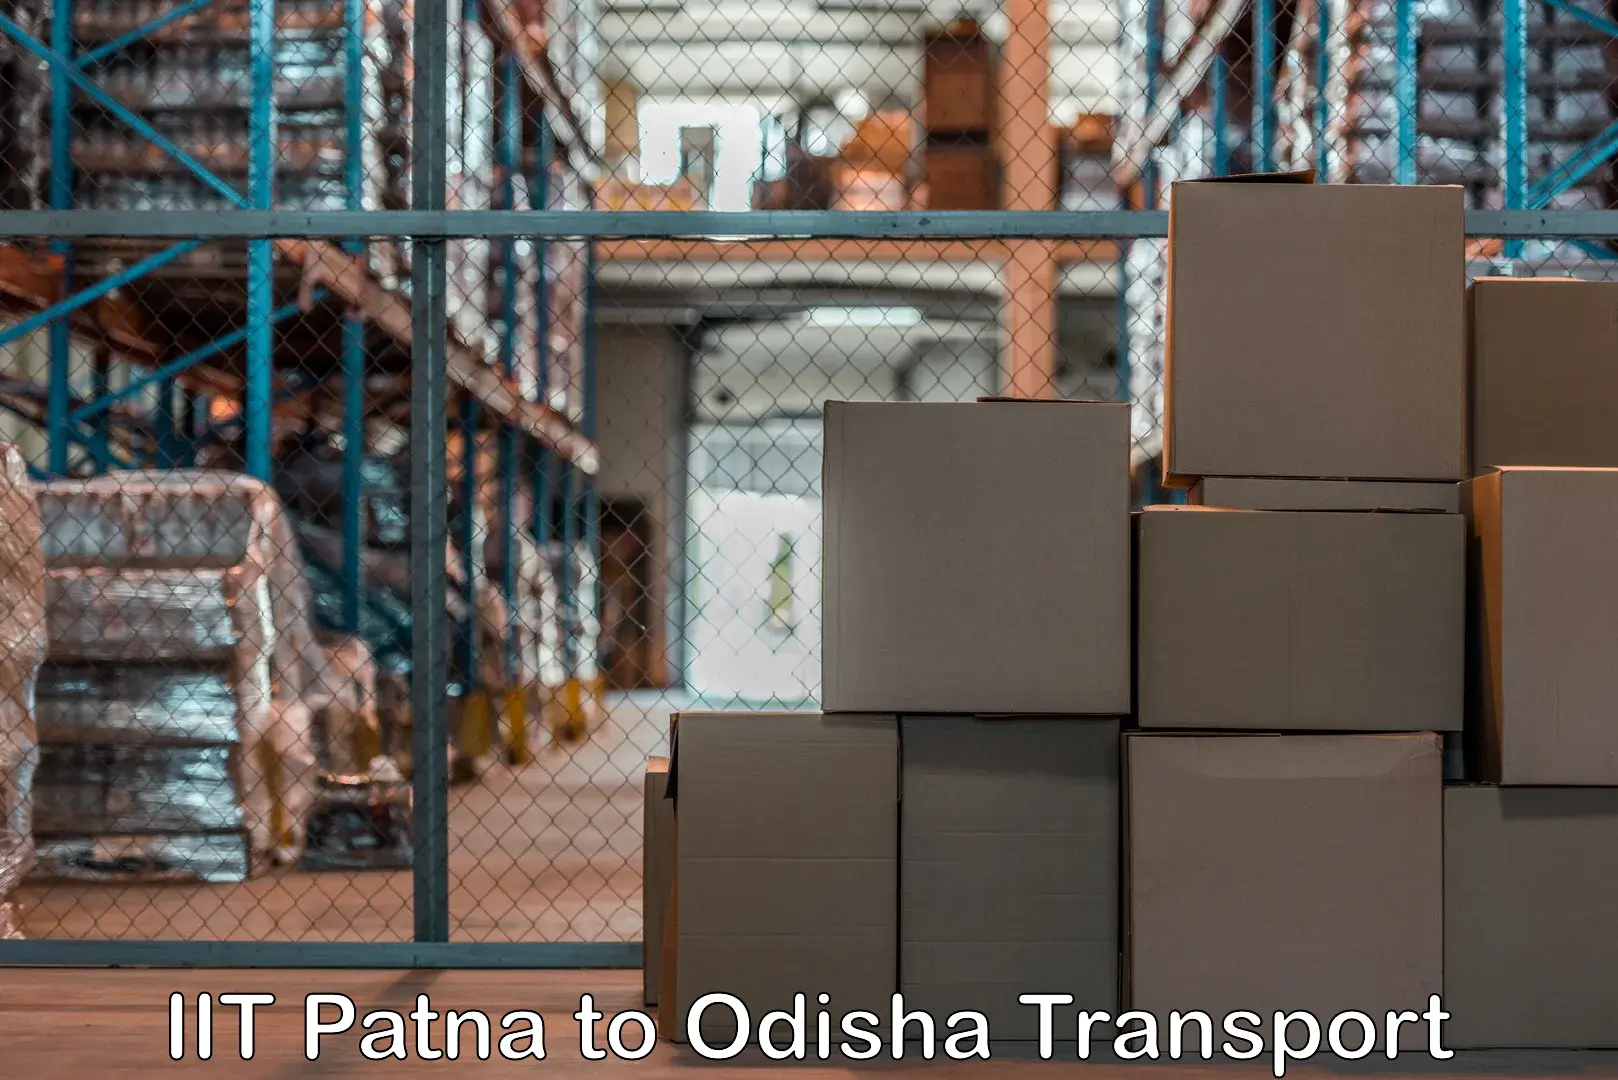 Goods delivery service IIT Patna to Nabarangpur